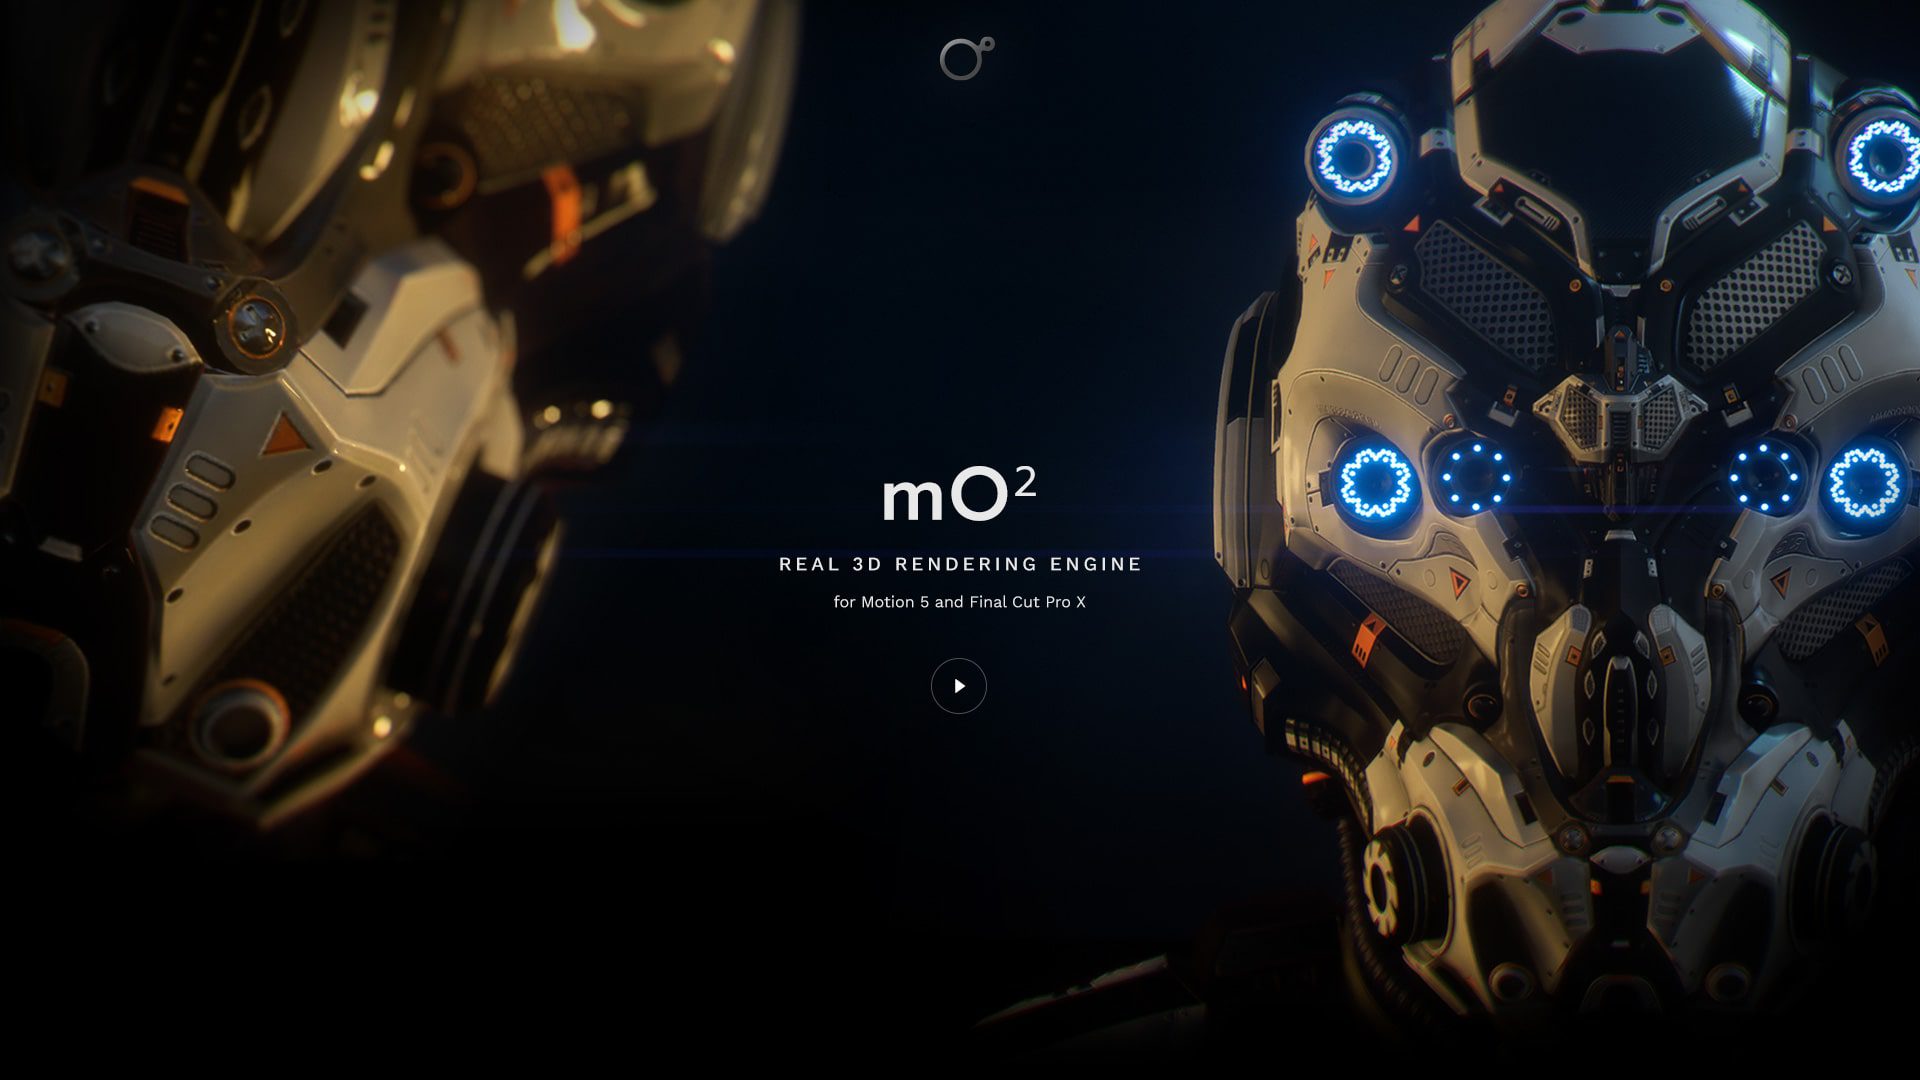 MotionVFX – mO2 REAL 3D RENDERING ENGINE